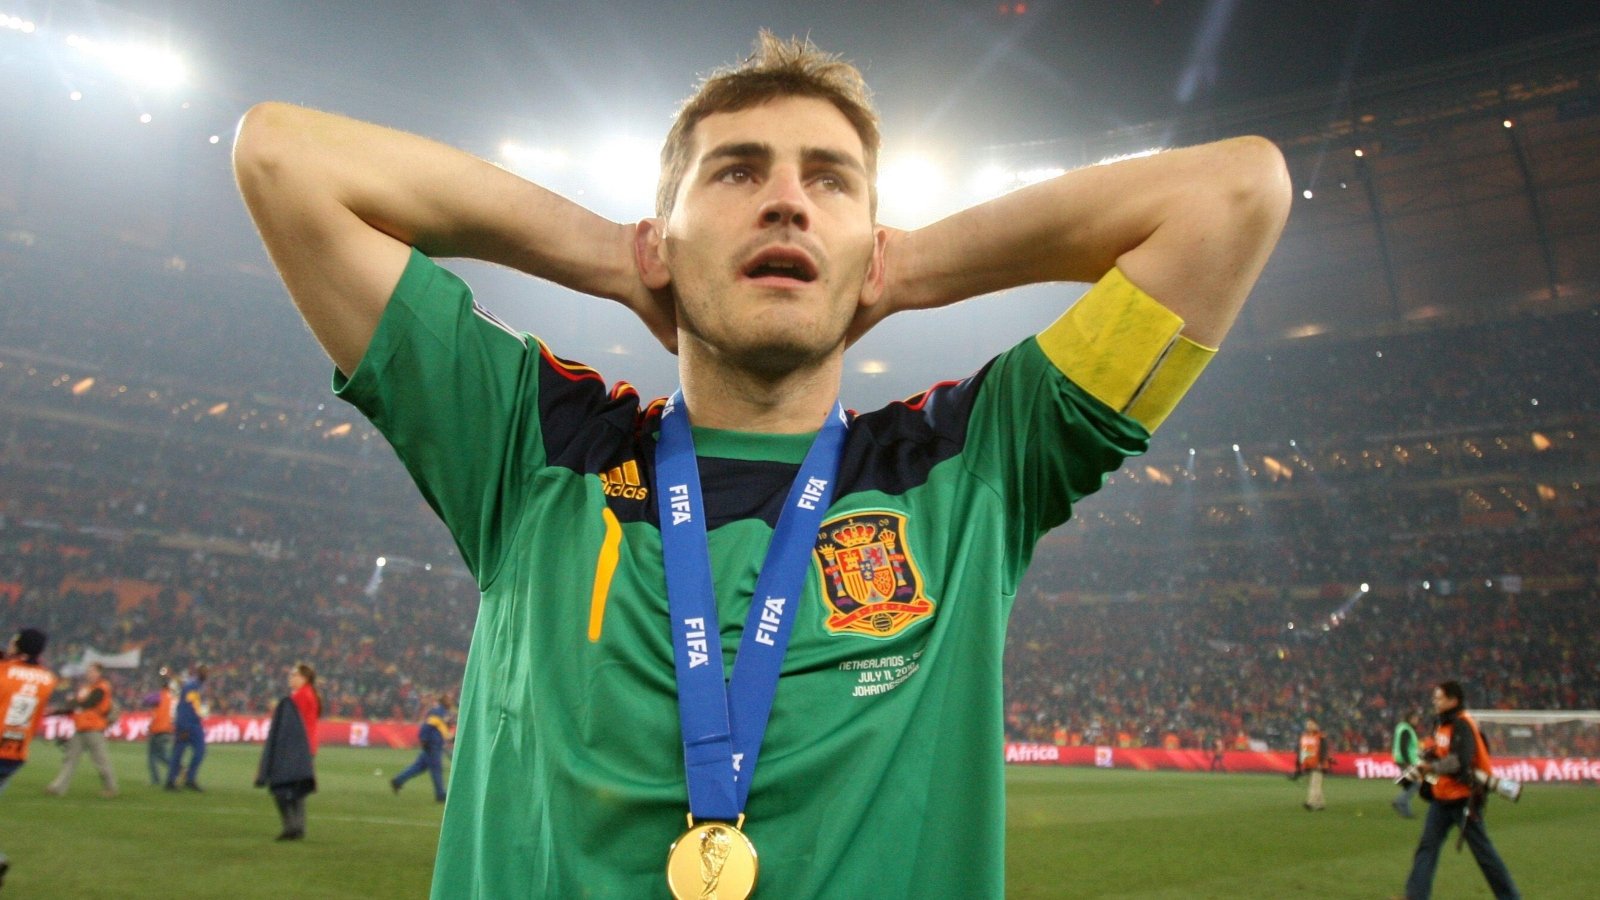 Own a Piece of Football History: Iker Casillas NFT Collection Now Available on SpaceSeven